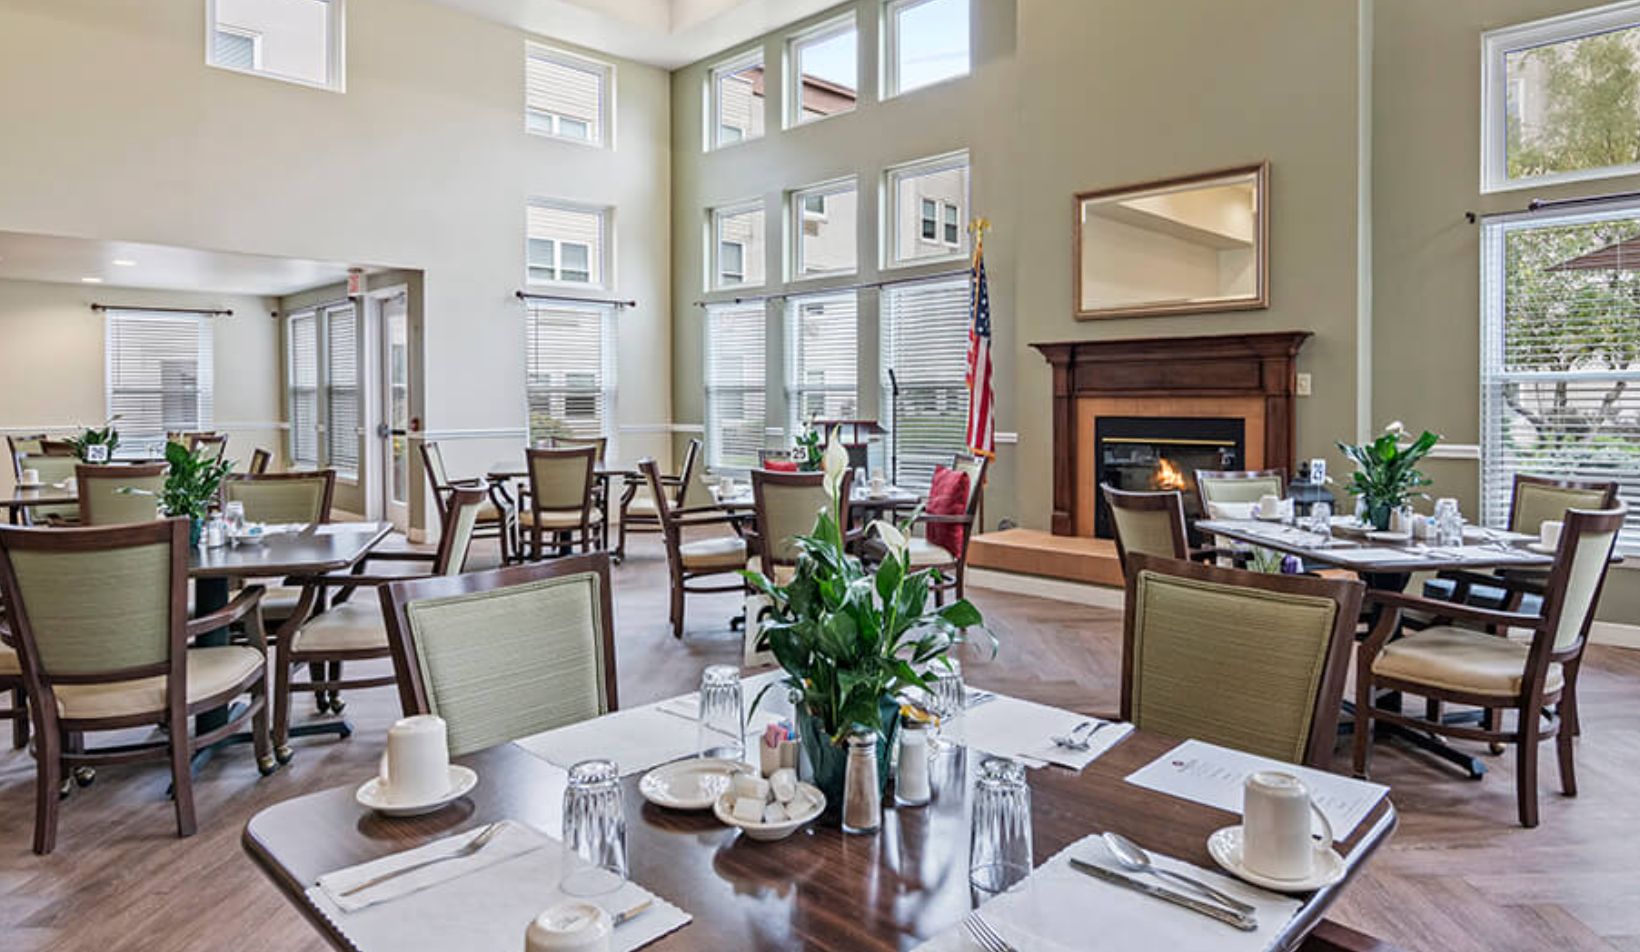 Interior view of Seaton Voorhees senior living community featuring dining room, lounge and coffee area.